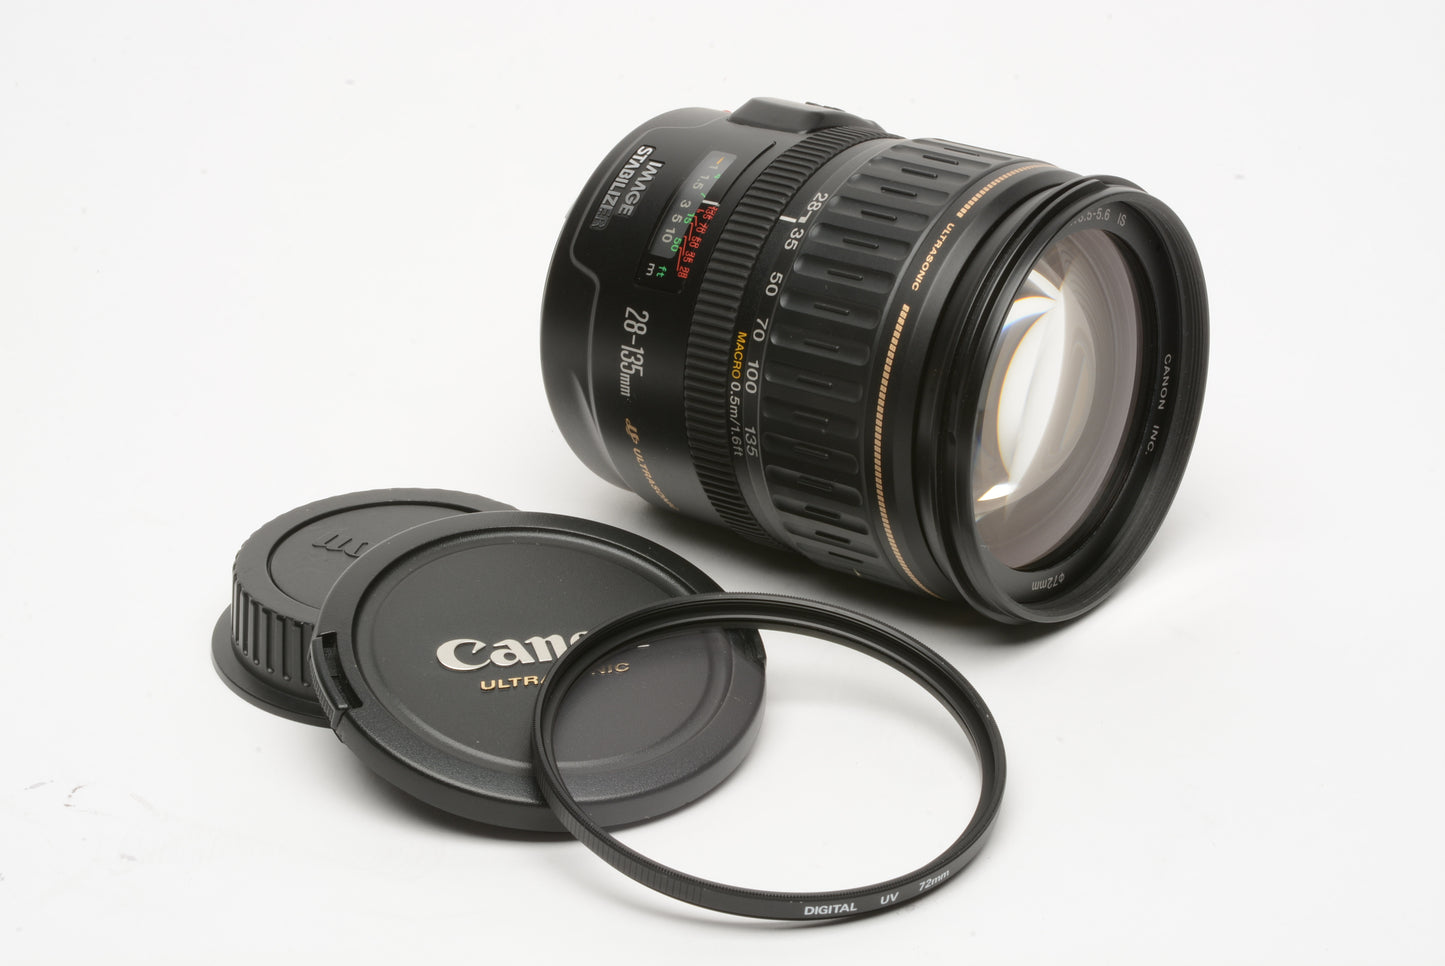 Canon EF 28-135mm f3.5-5.6 IS zoom lens, caps + UV filter, clean!